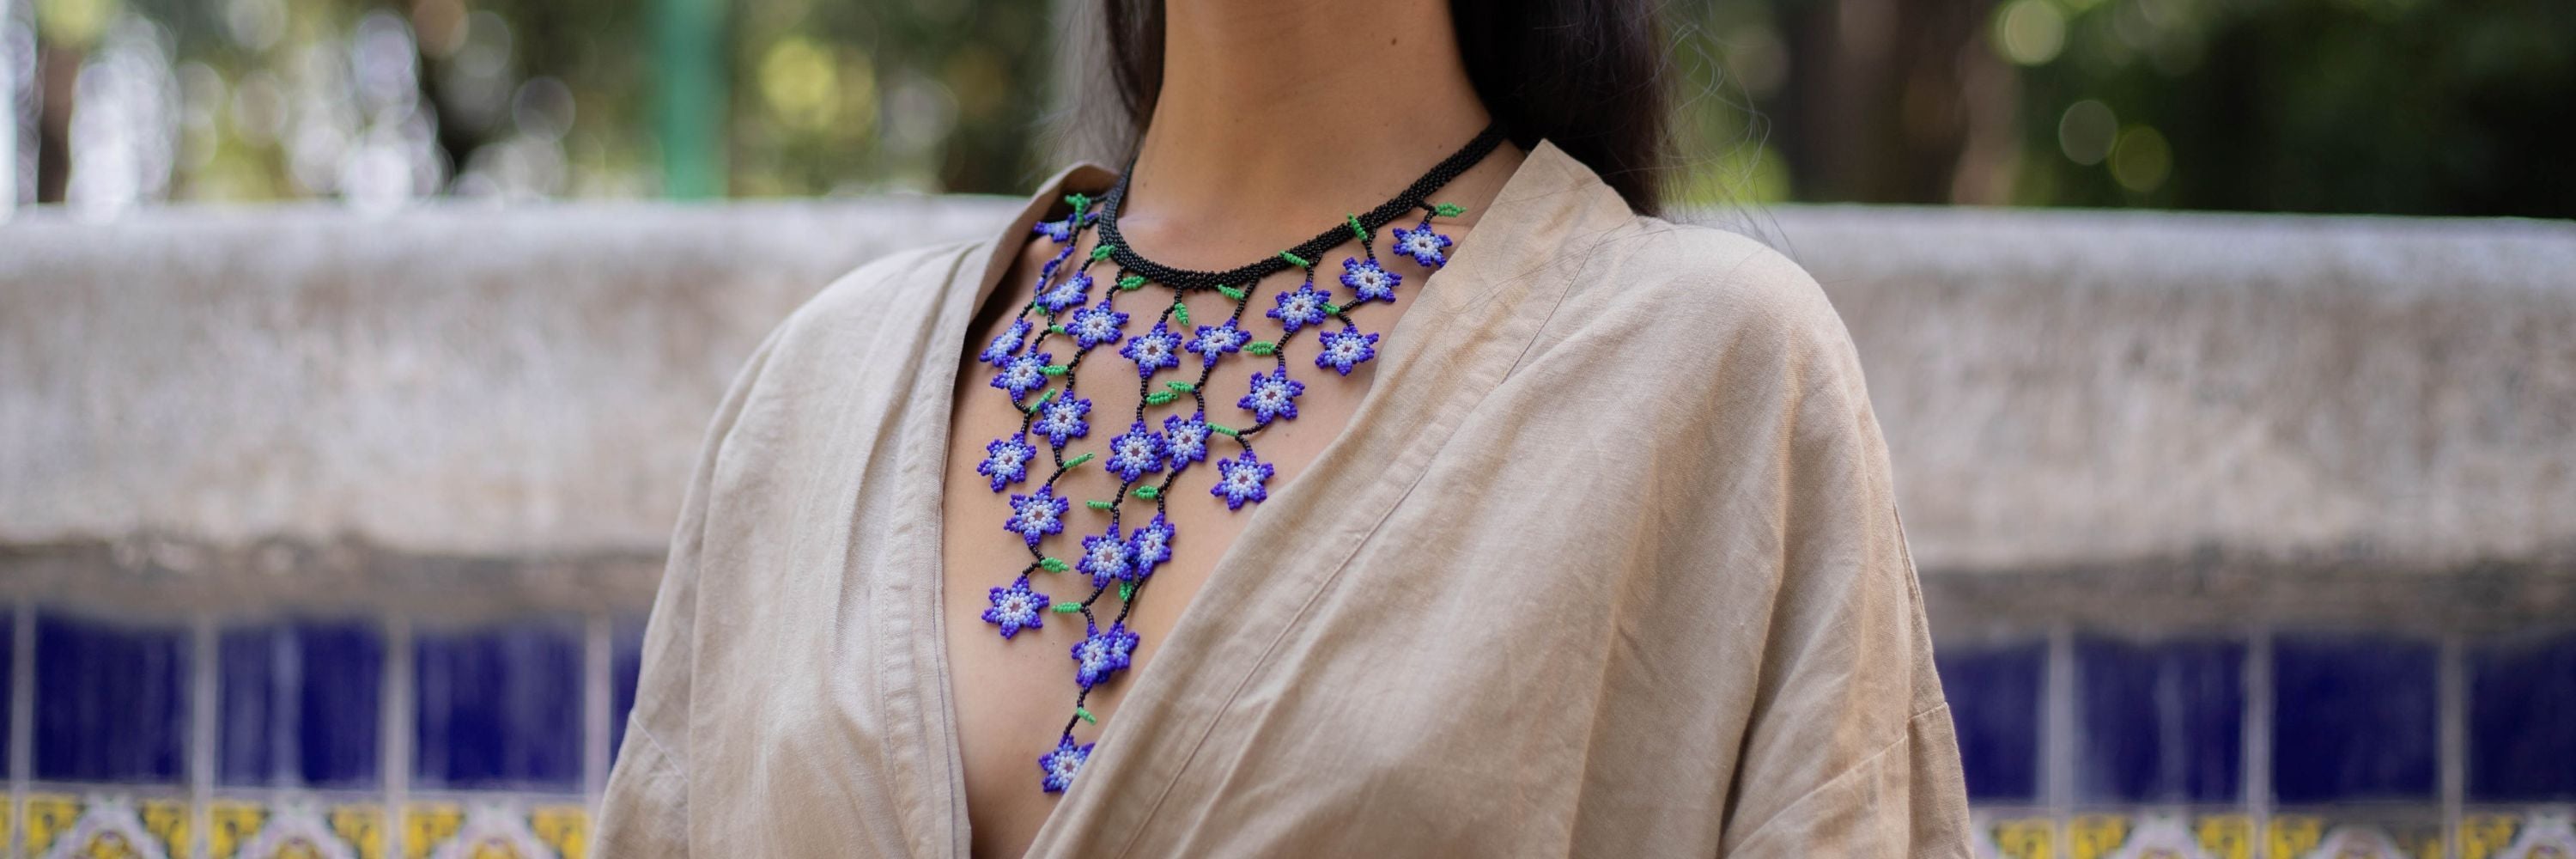 Detailed beaded necklace designs handmade by artisans